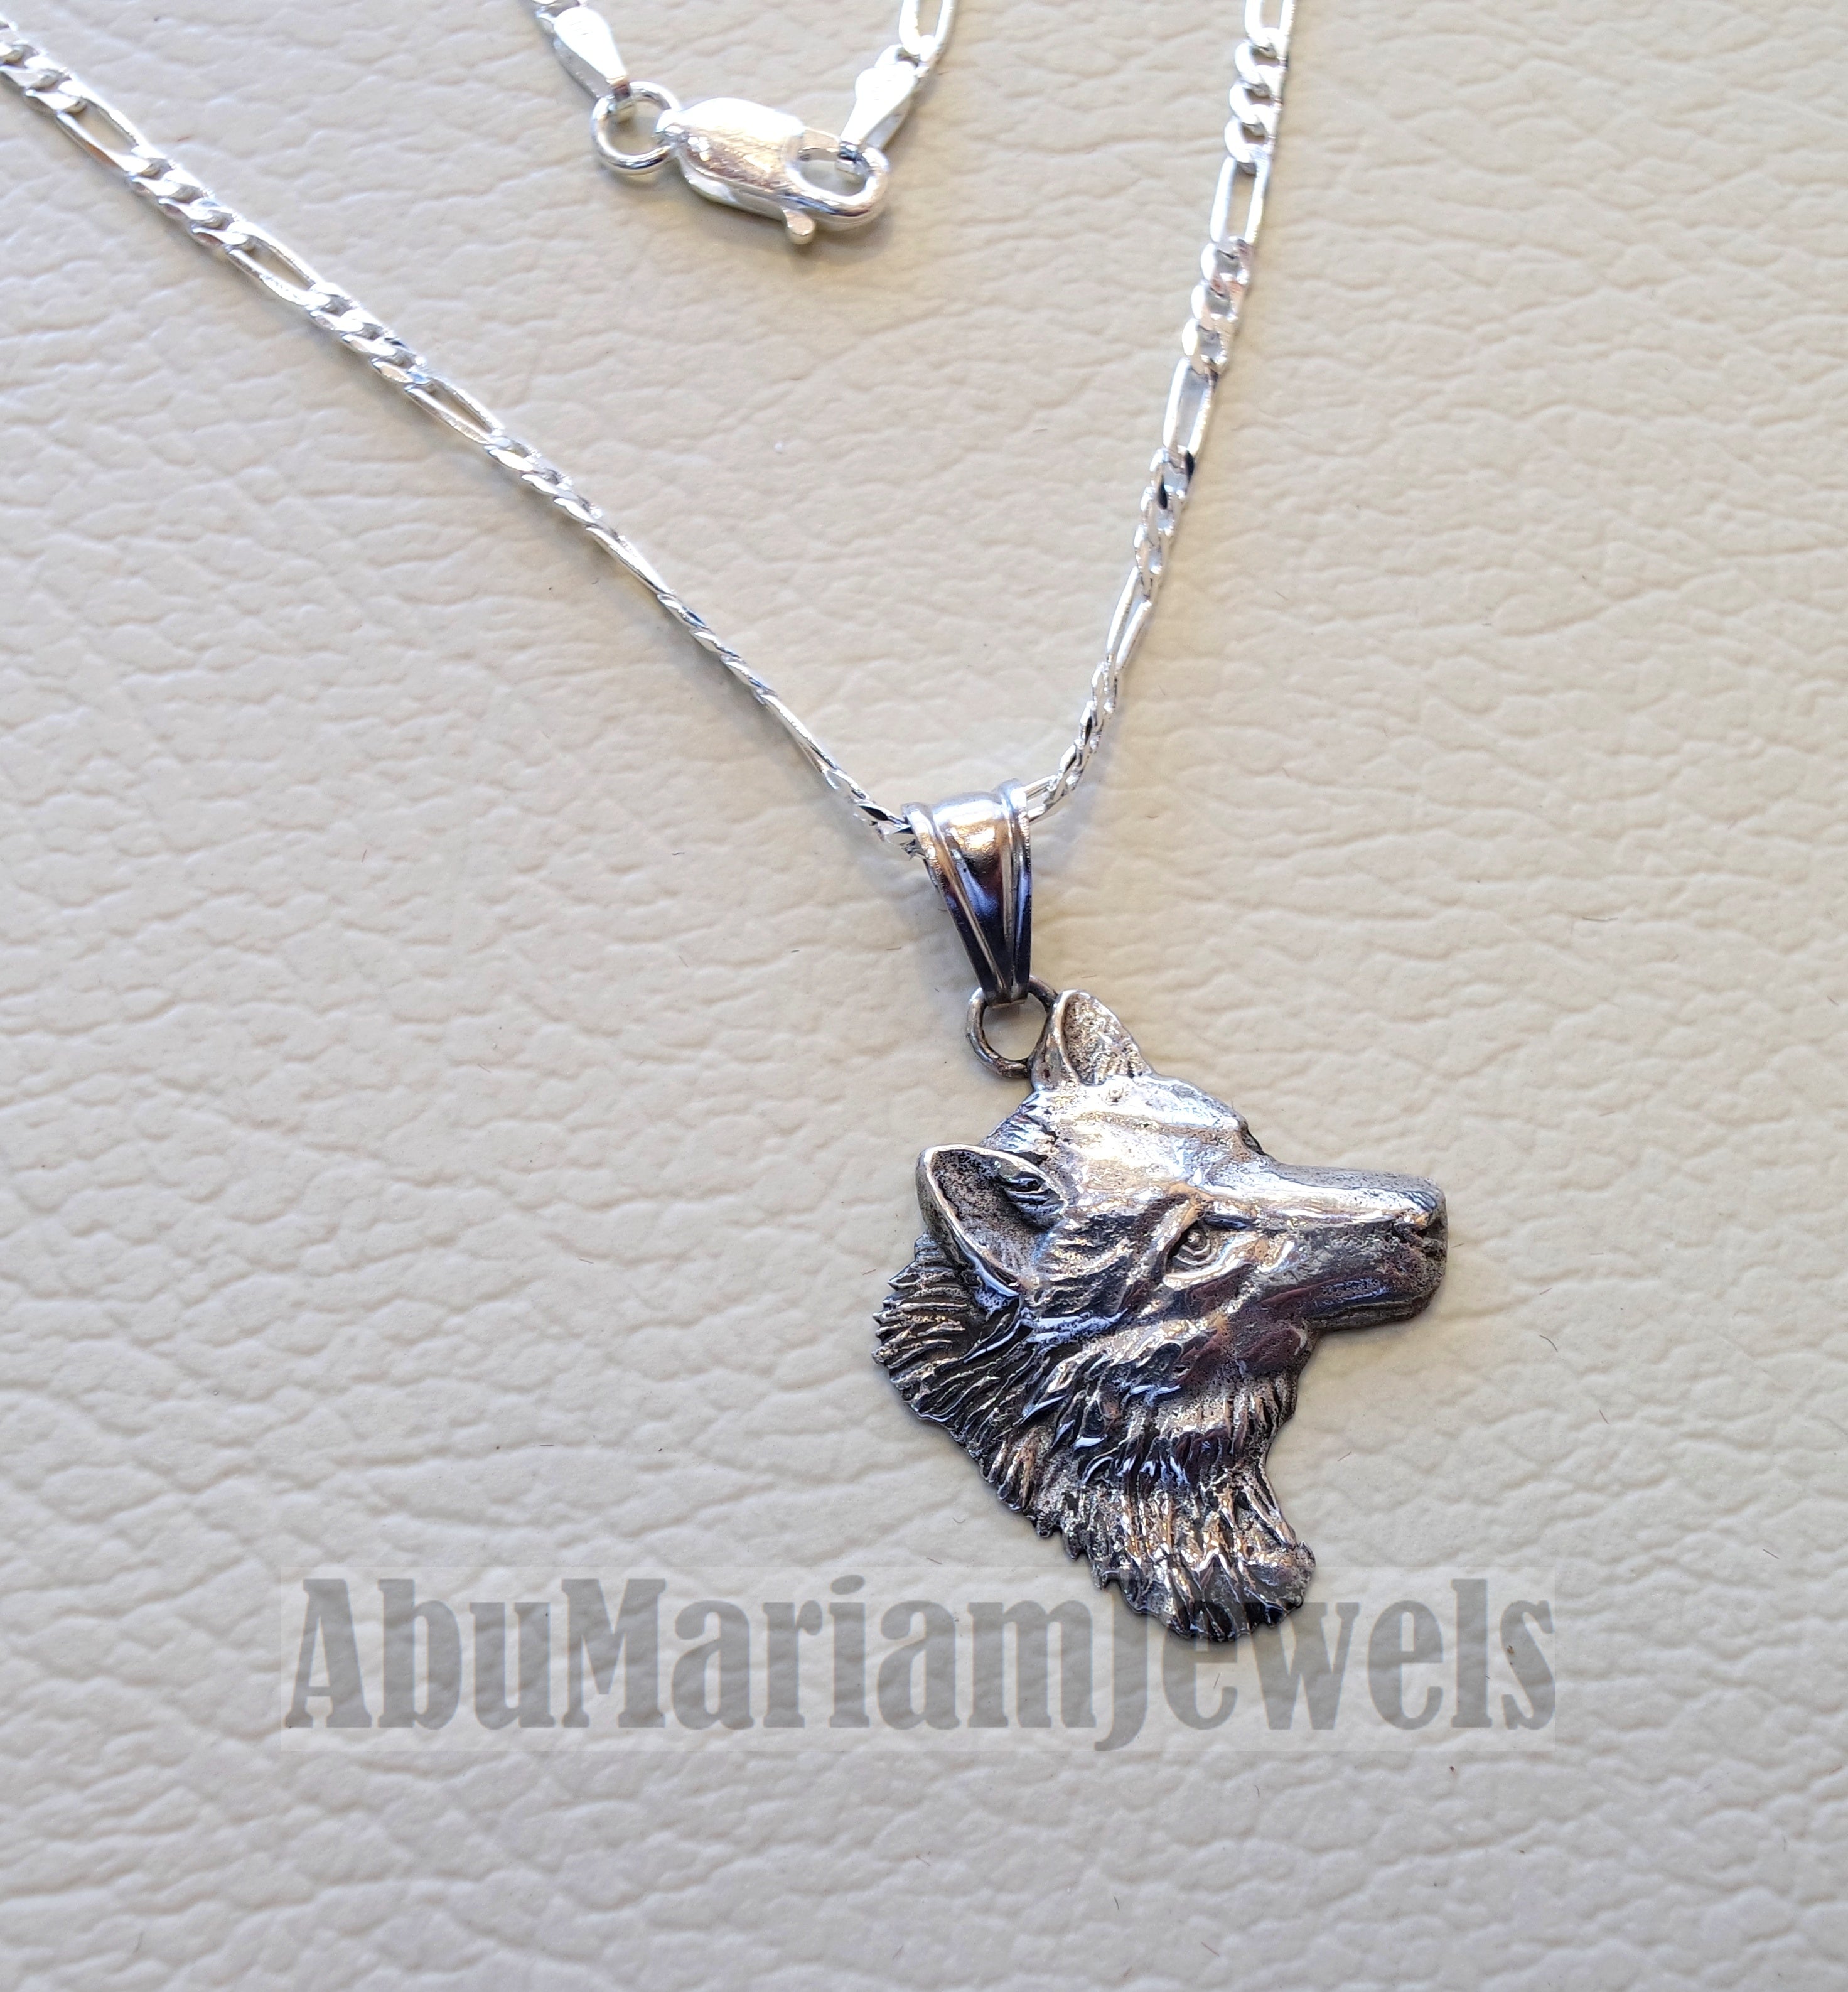 wolf , Husky dog sterling silver 925 pendant with thin figaro chain handmade animal head jewelry fast shipping detailed craftsmanship